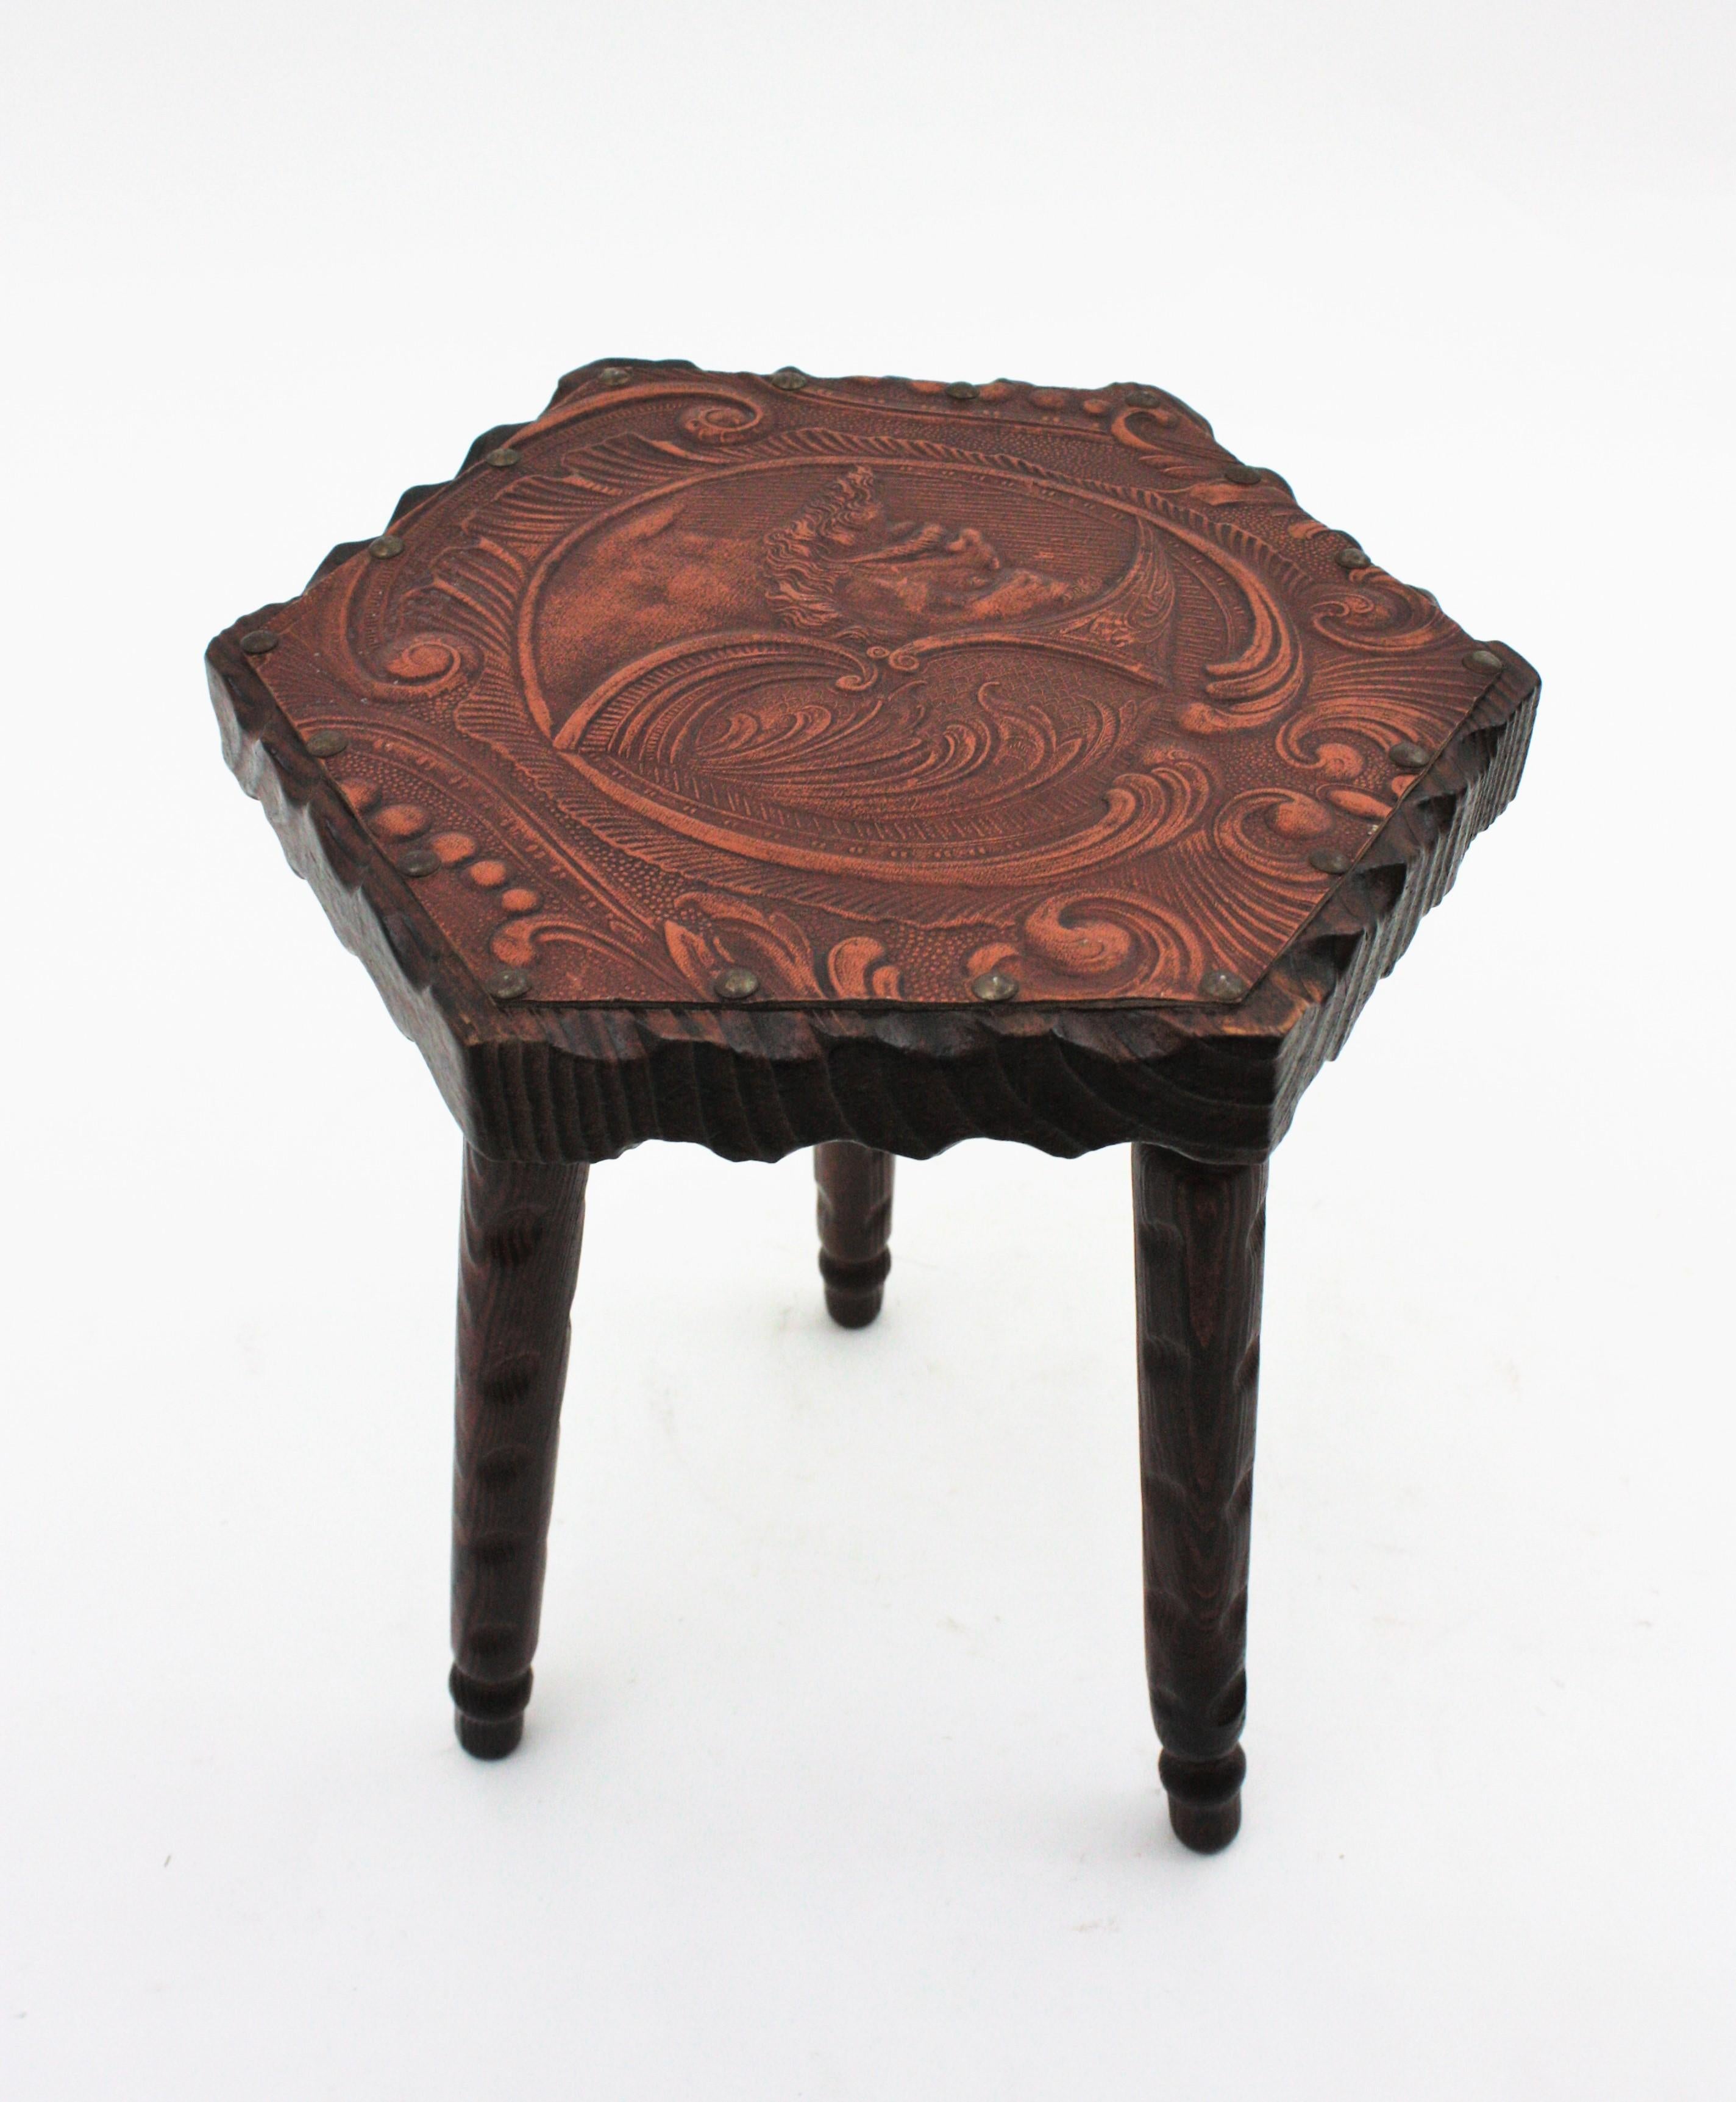 Two Spanish Colonial Hexagonal Tables in Carved Wood & Repousse Leather, 1940s For Sale 12